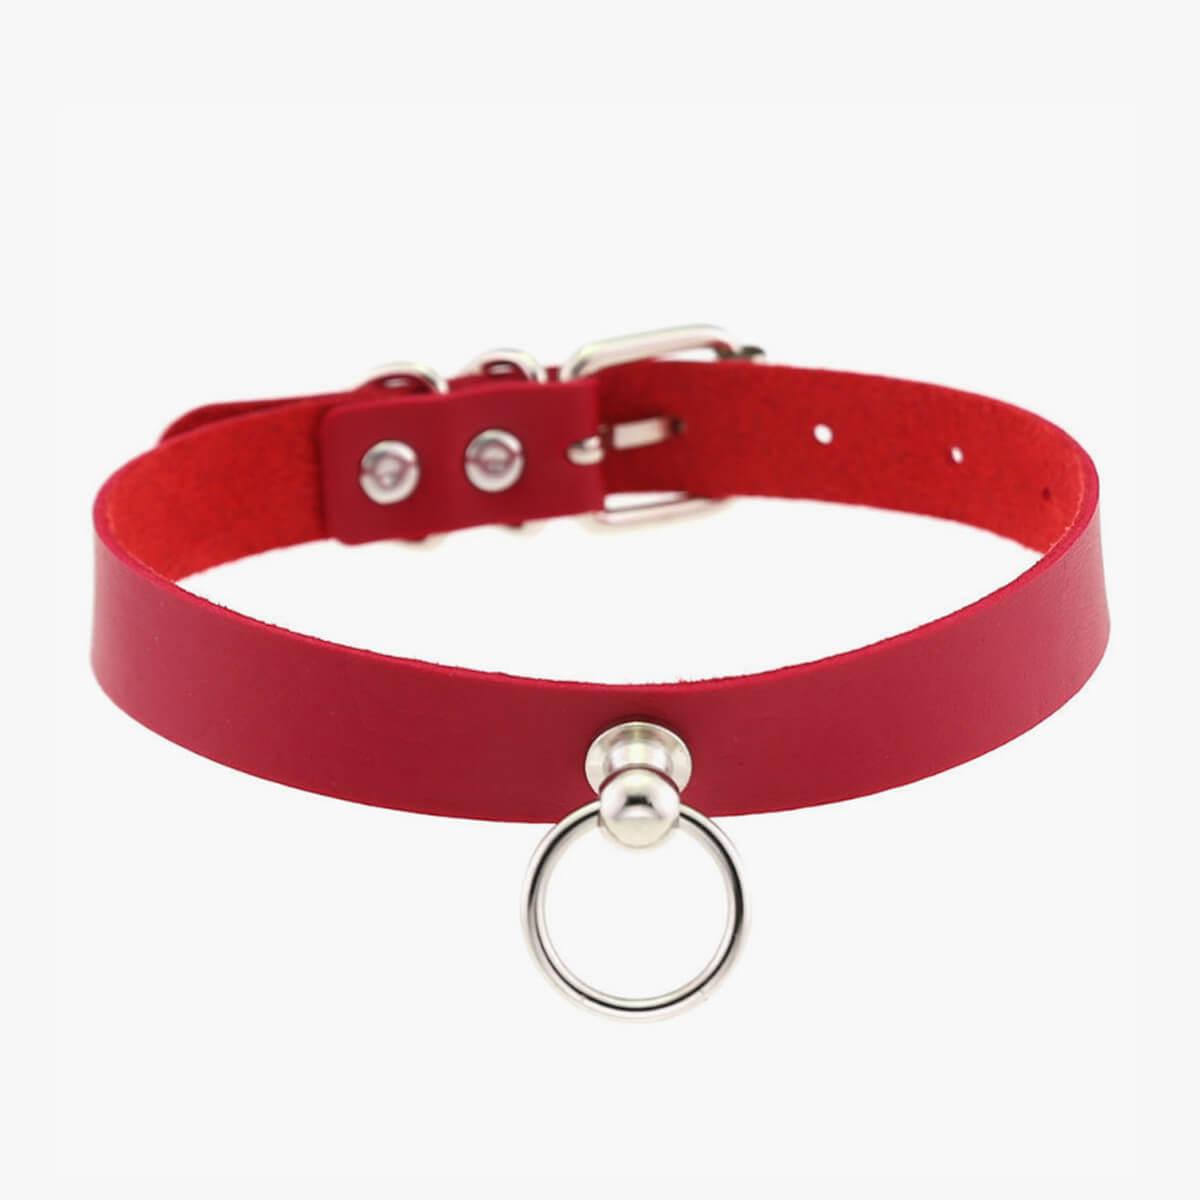 Chainsaw Man Reze Cosplay Choker Necklace - Aesthetic Clothes Shop